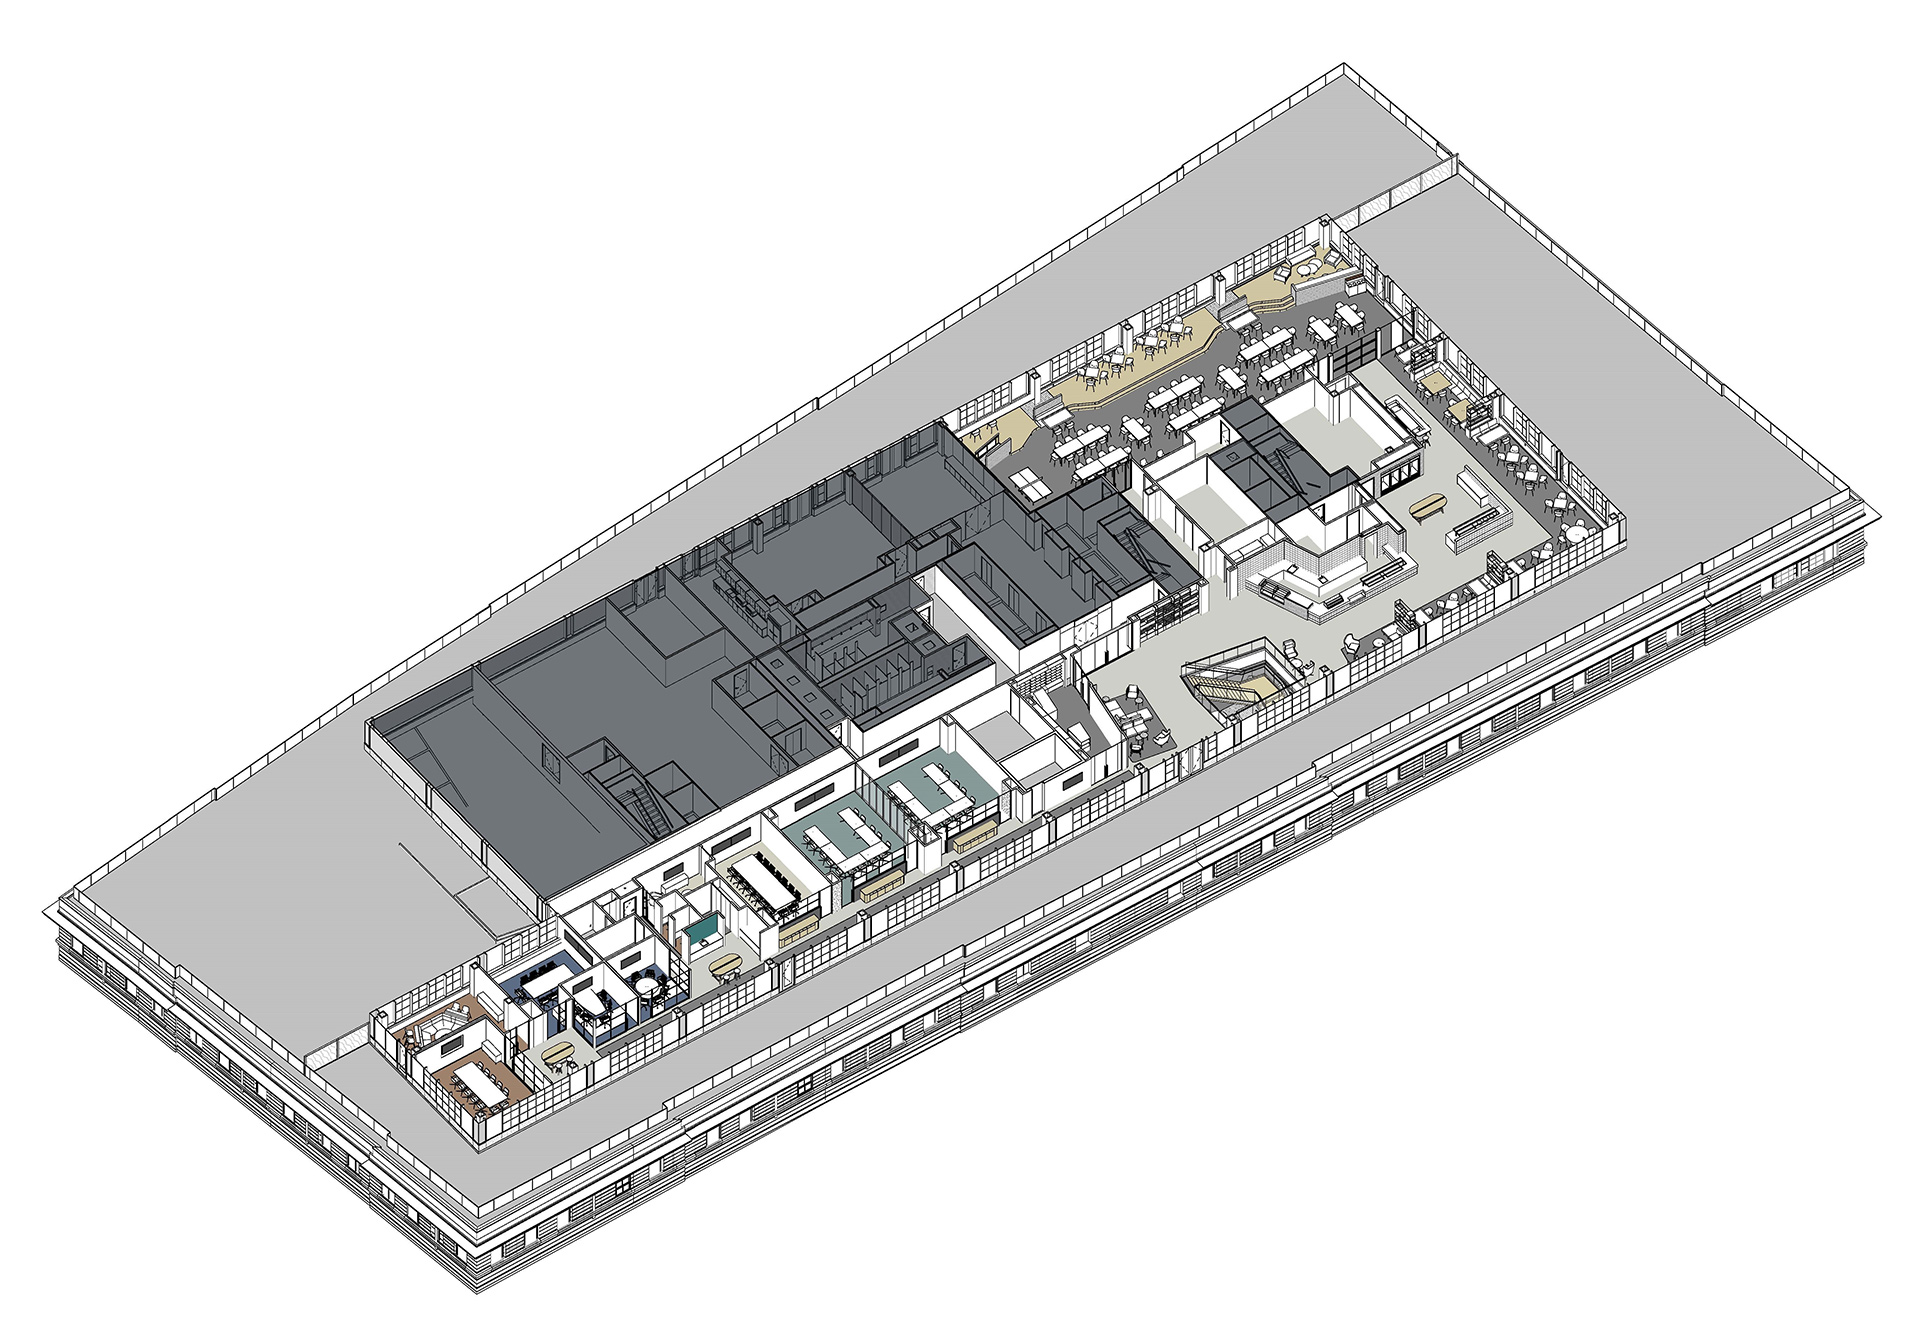 Axonometric floor plan of the 7th floor at the new Mars Wrigley headquarters